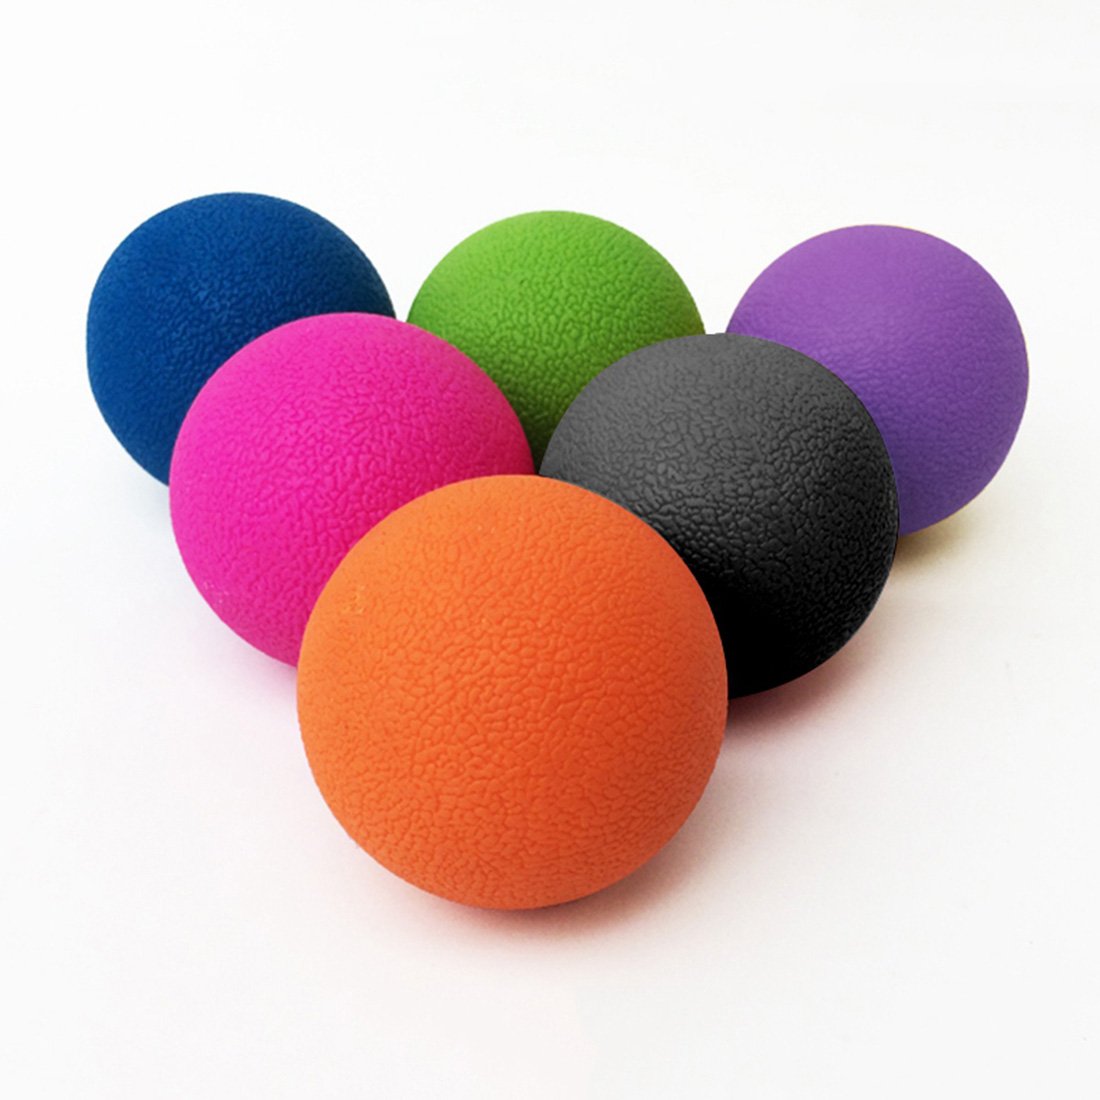 How to choose between massage ball options